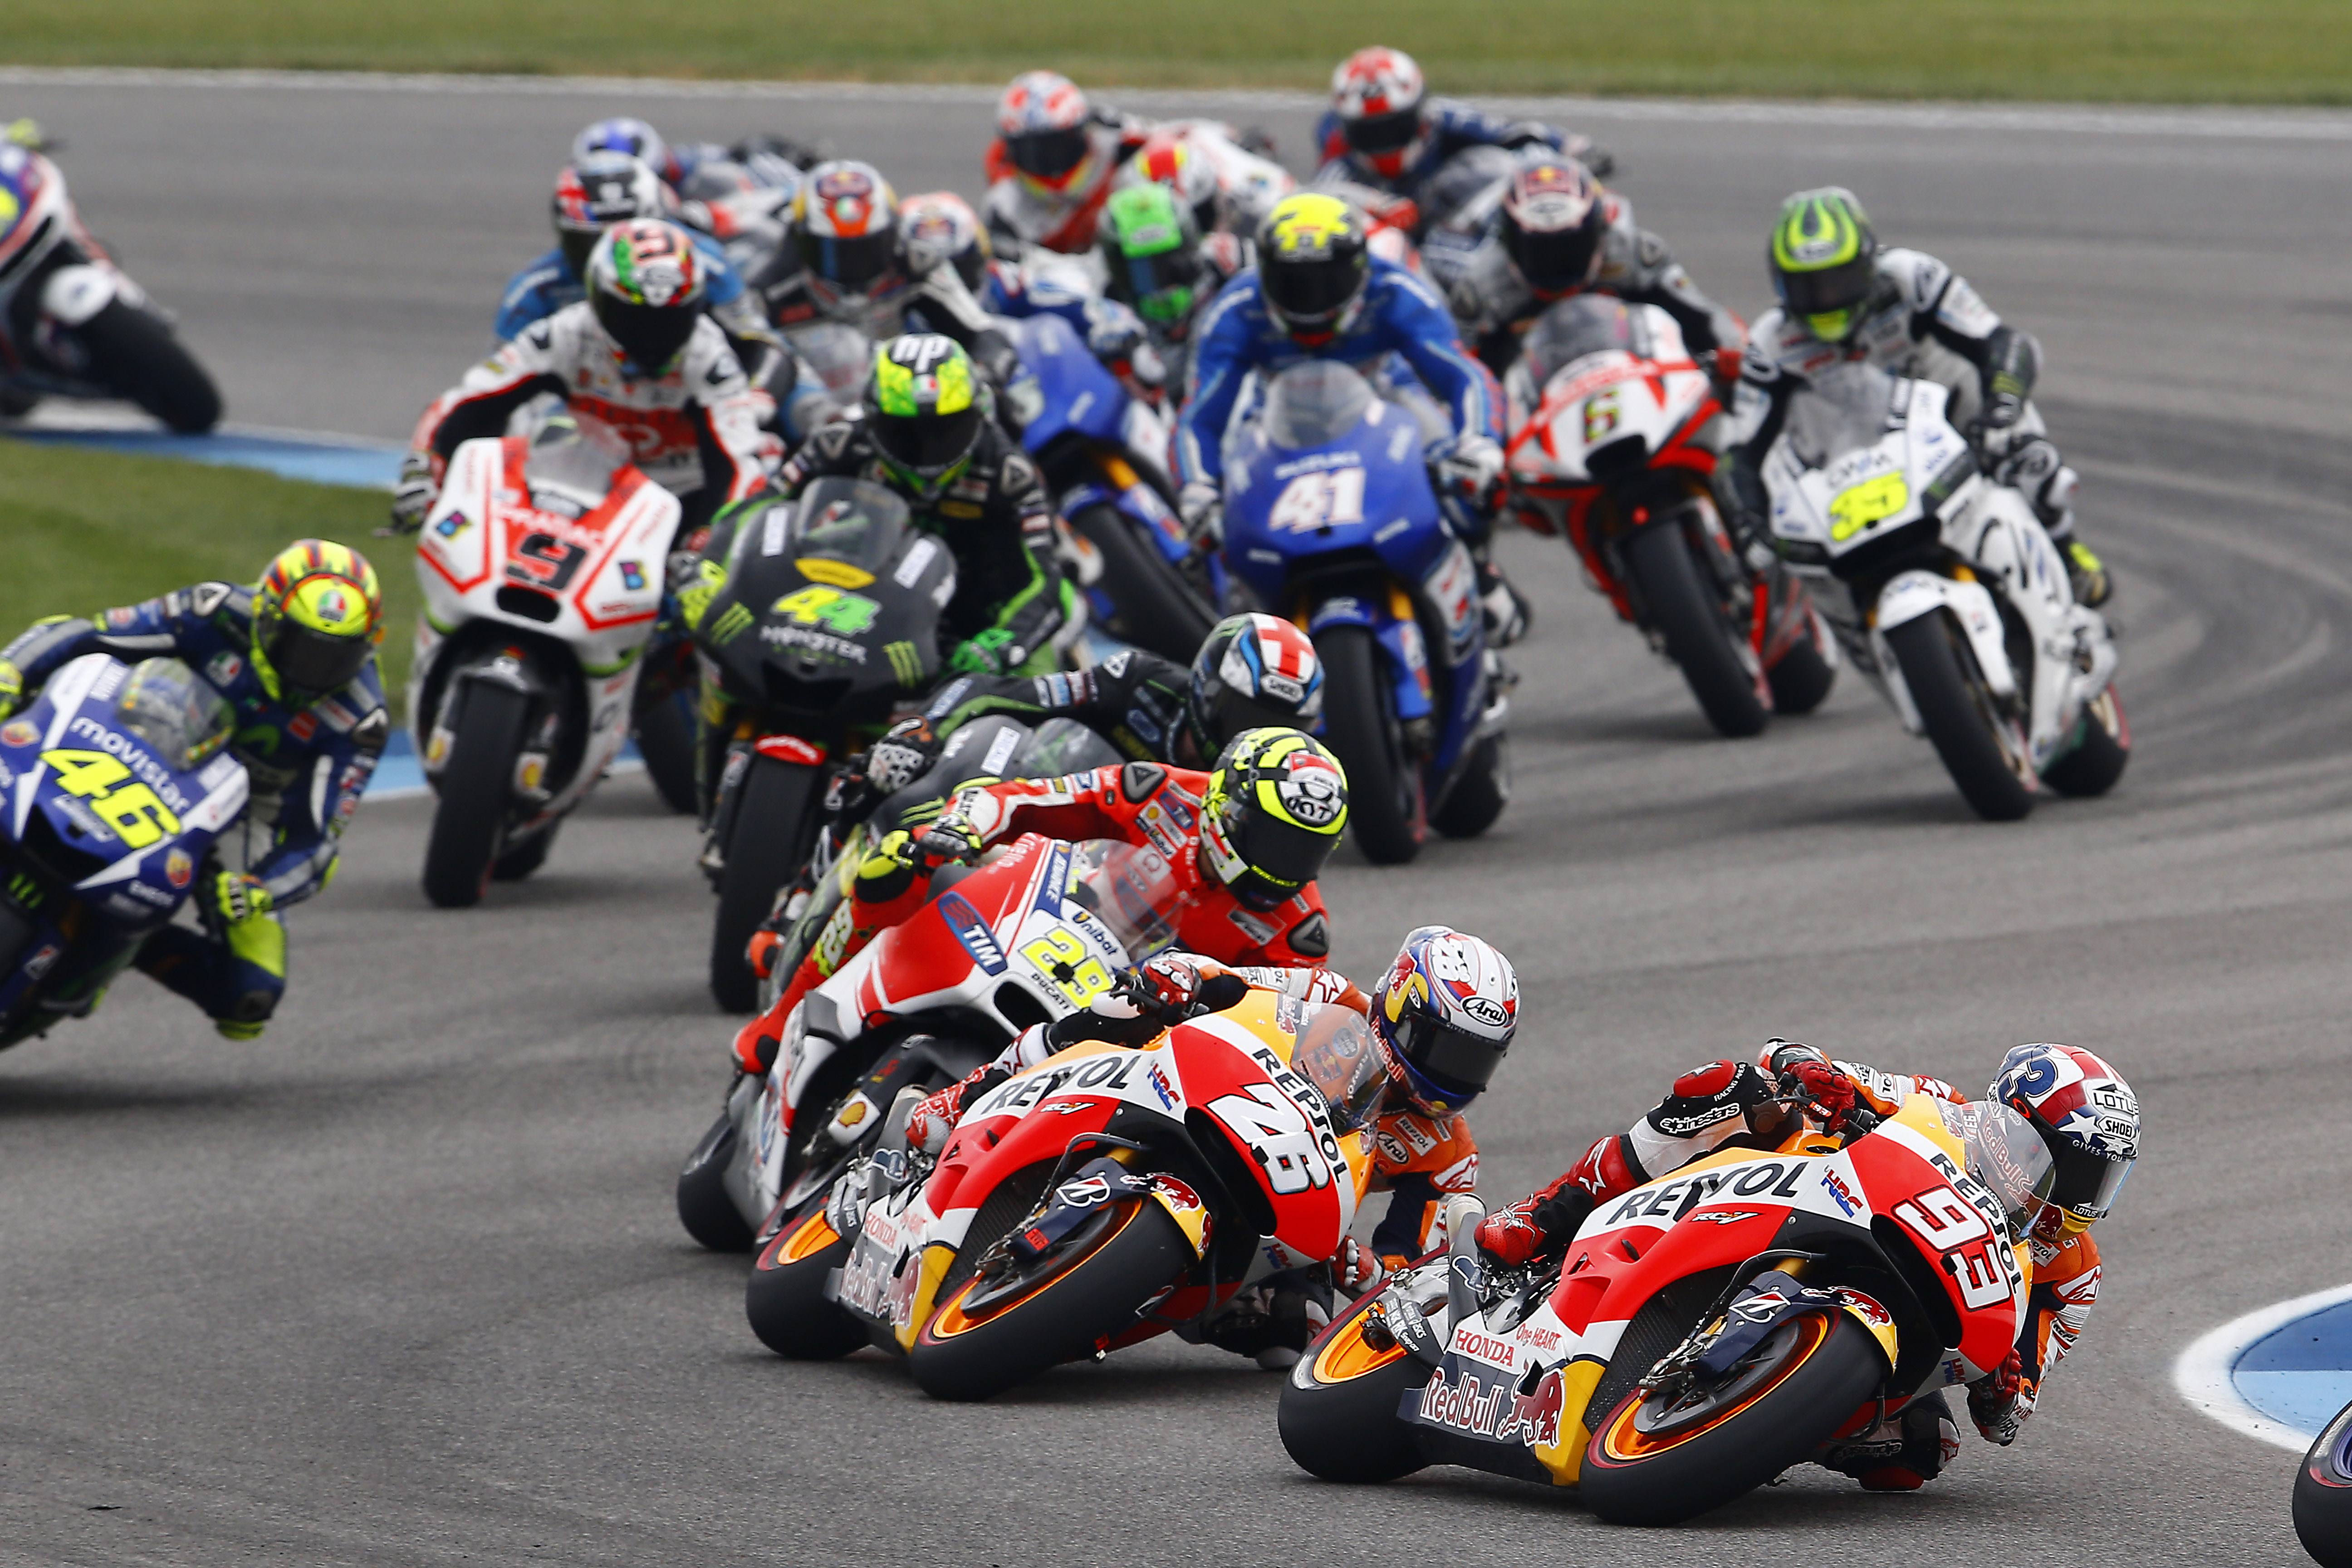 MotoGP 2015: Indianapolis race results